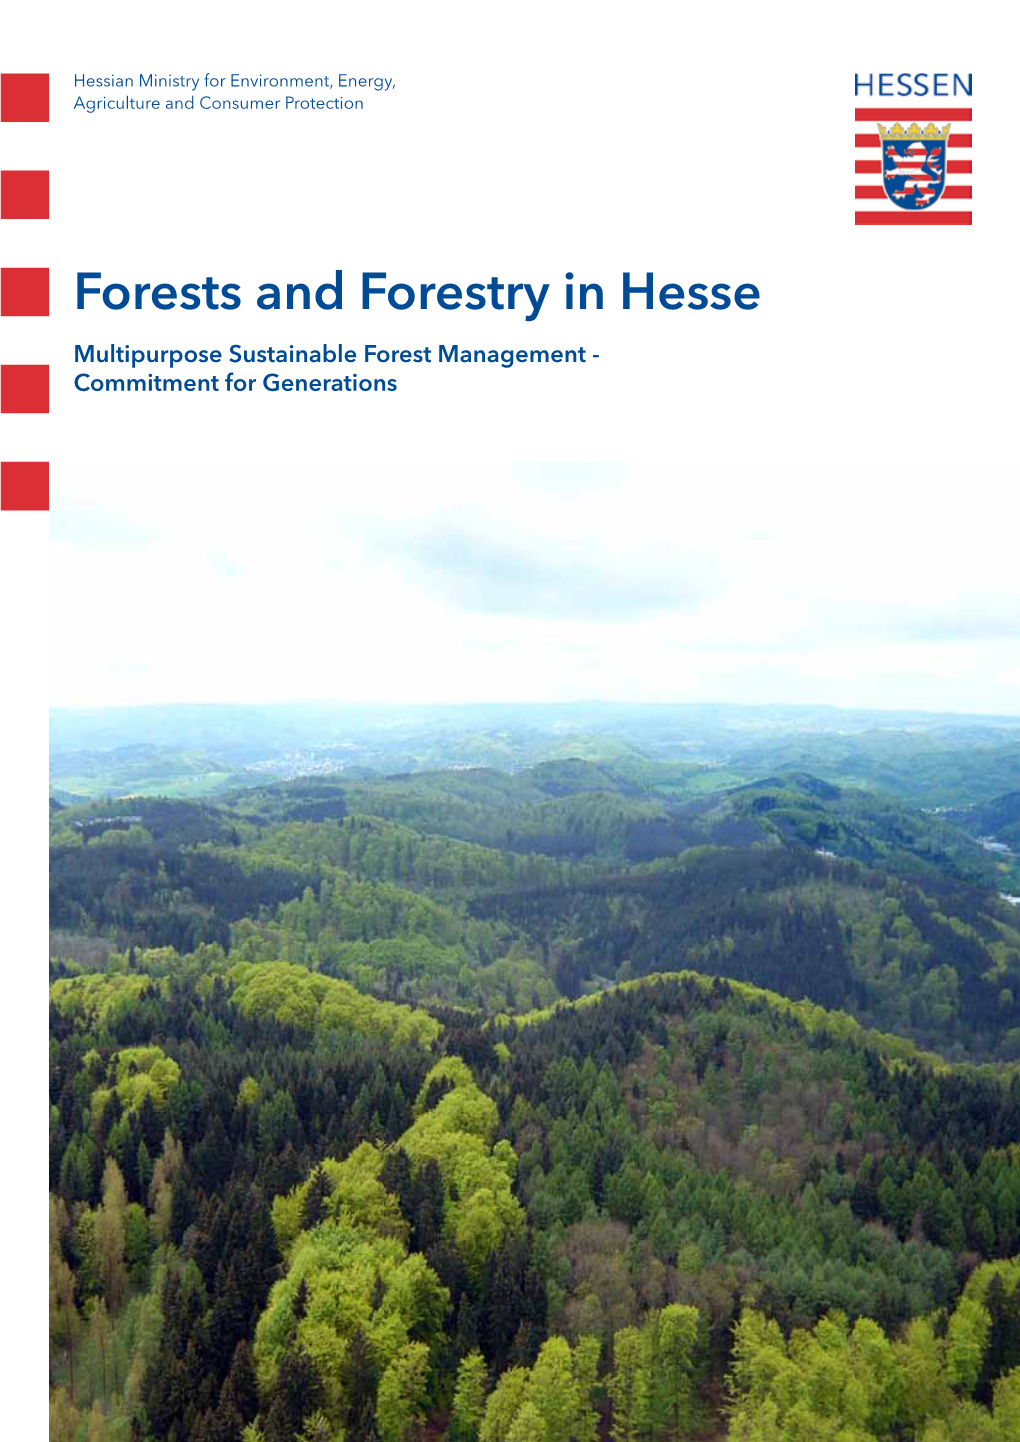 Forests and Forestry in Hesse Multipurpose Sustainable Forest Management - Commitment for Generations